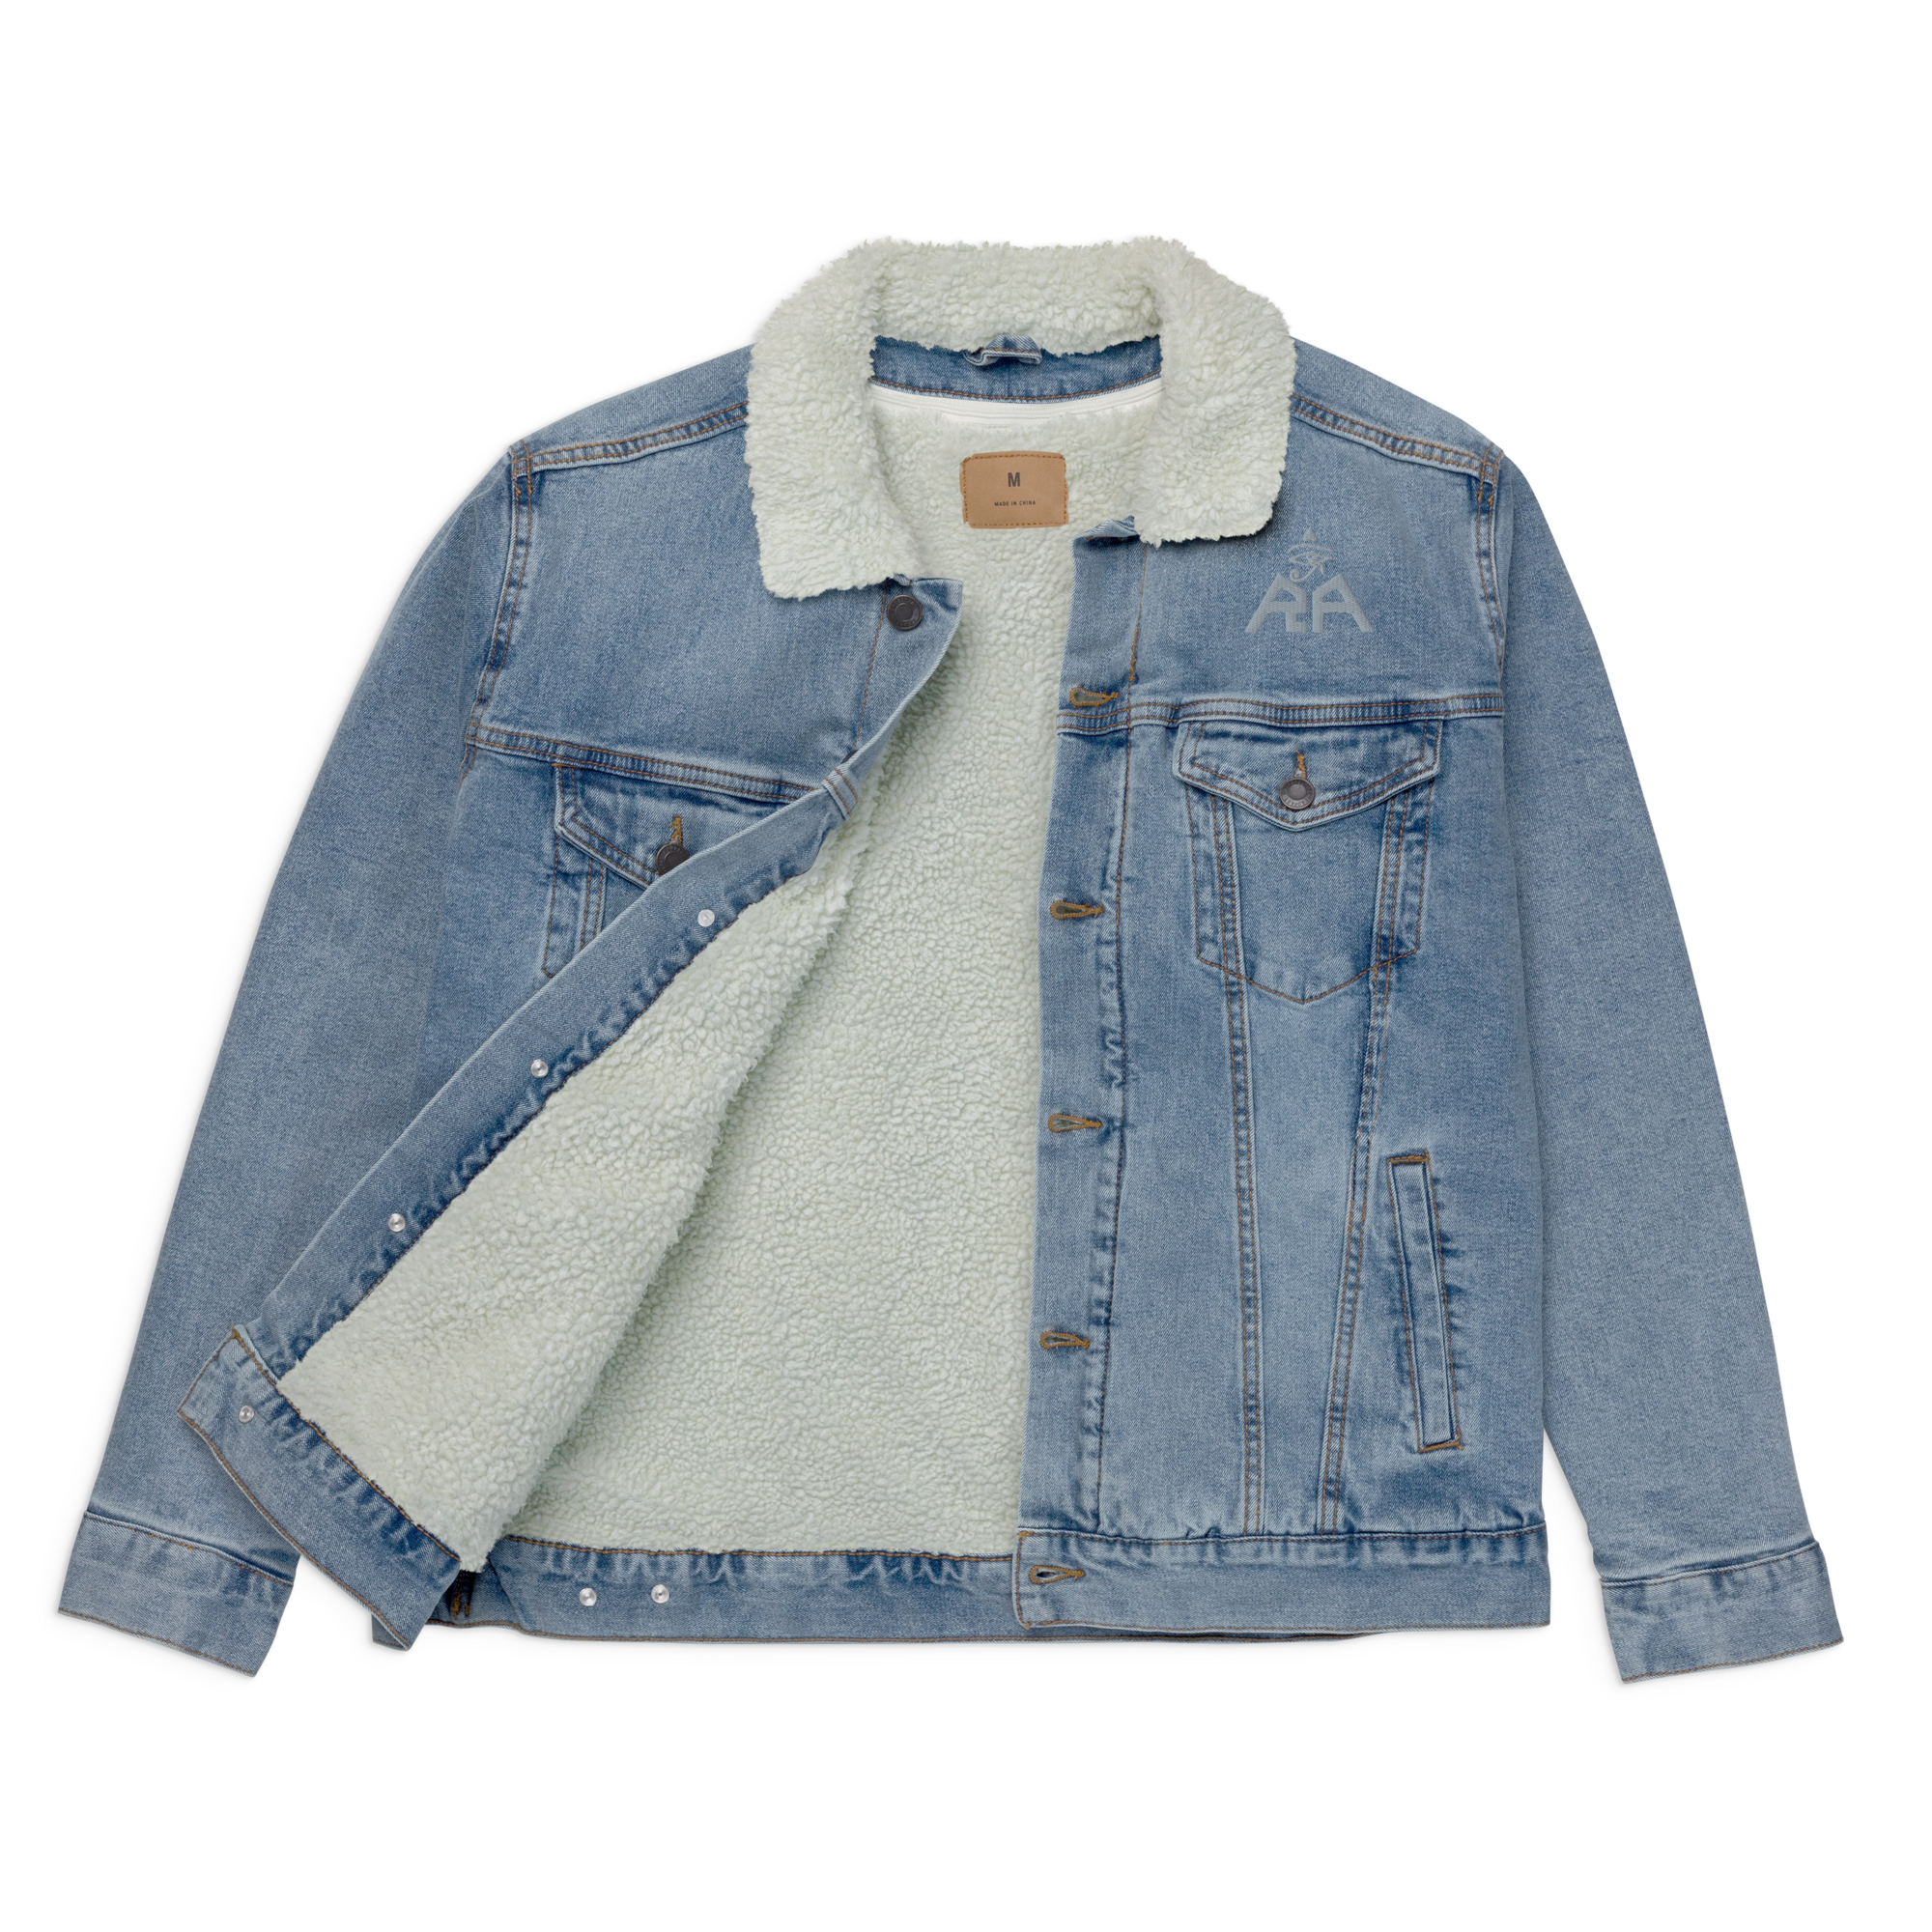 Hollister Patchwork Sherpa Lined Denim Jean Jacket Button Down Fleece size  XS - $47 - From Lina